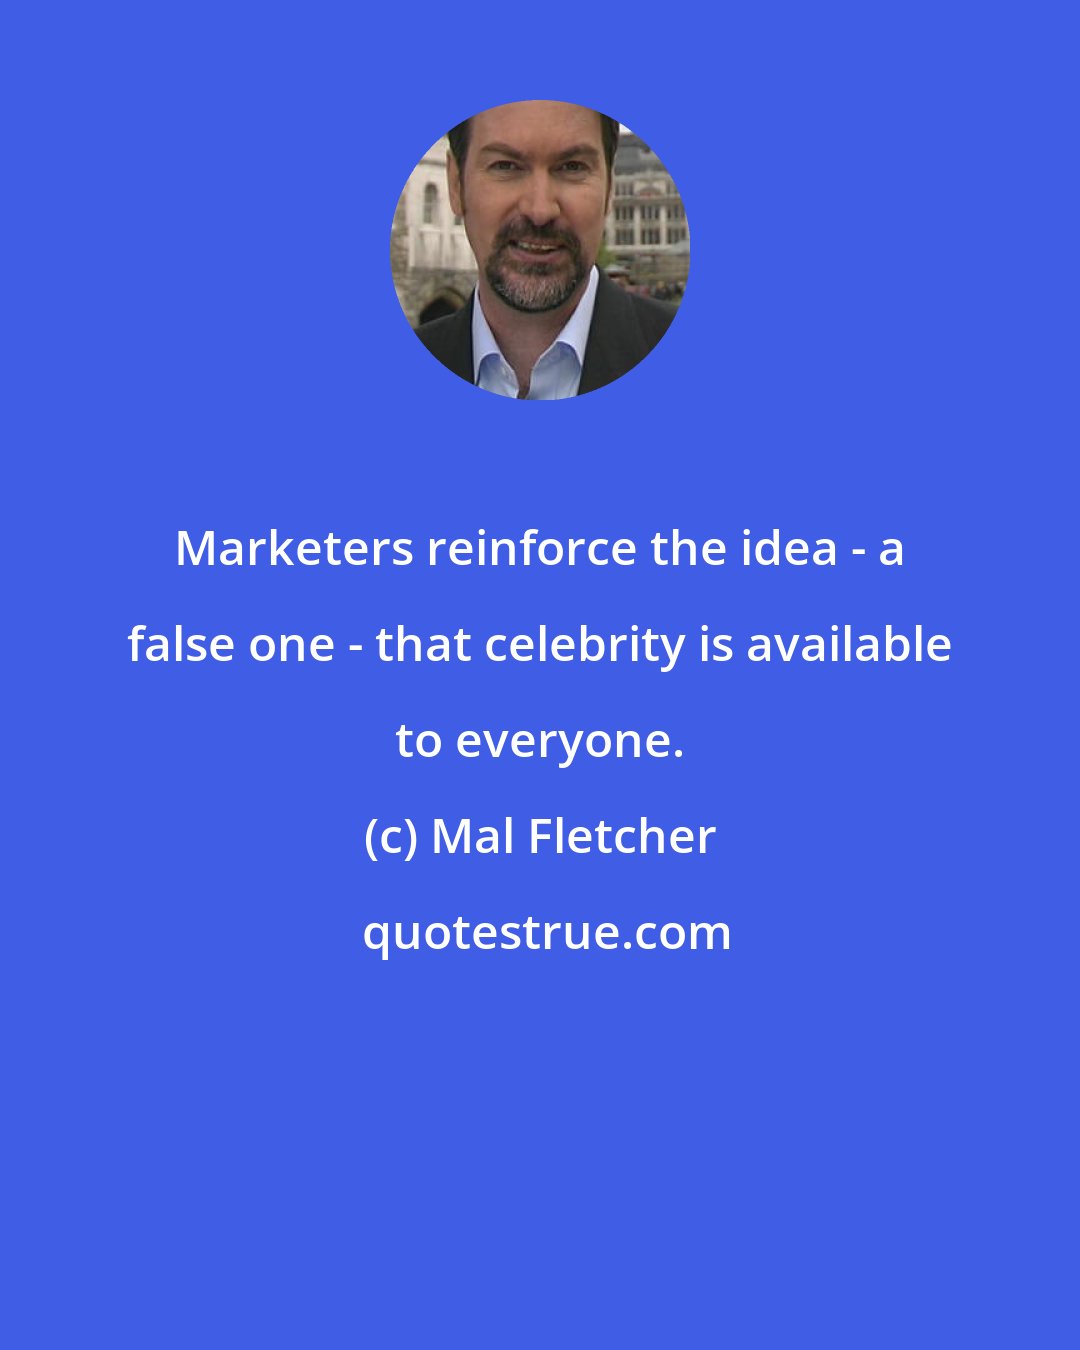 Mal Fletcher: Marketers reinforce the idea - a false one - that celebrity is available to everyone.